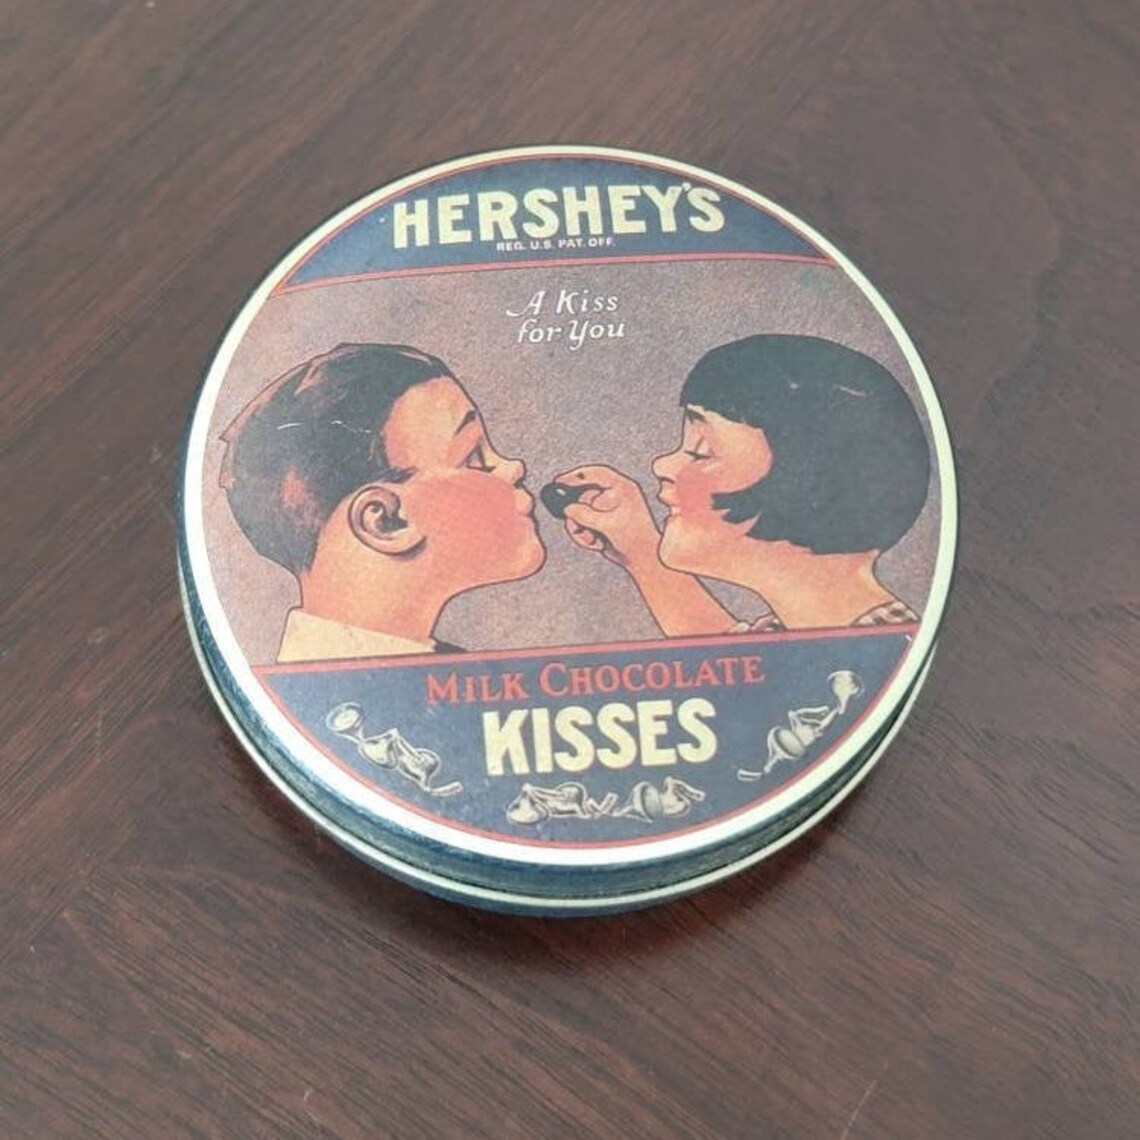 Candle in Hersheys Kisses Candle Tin country spice scentins | Etsy